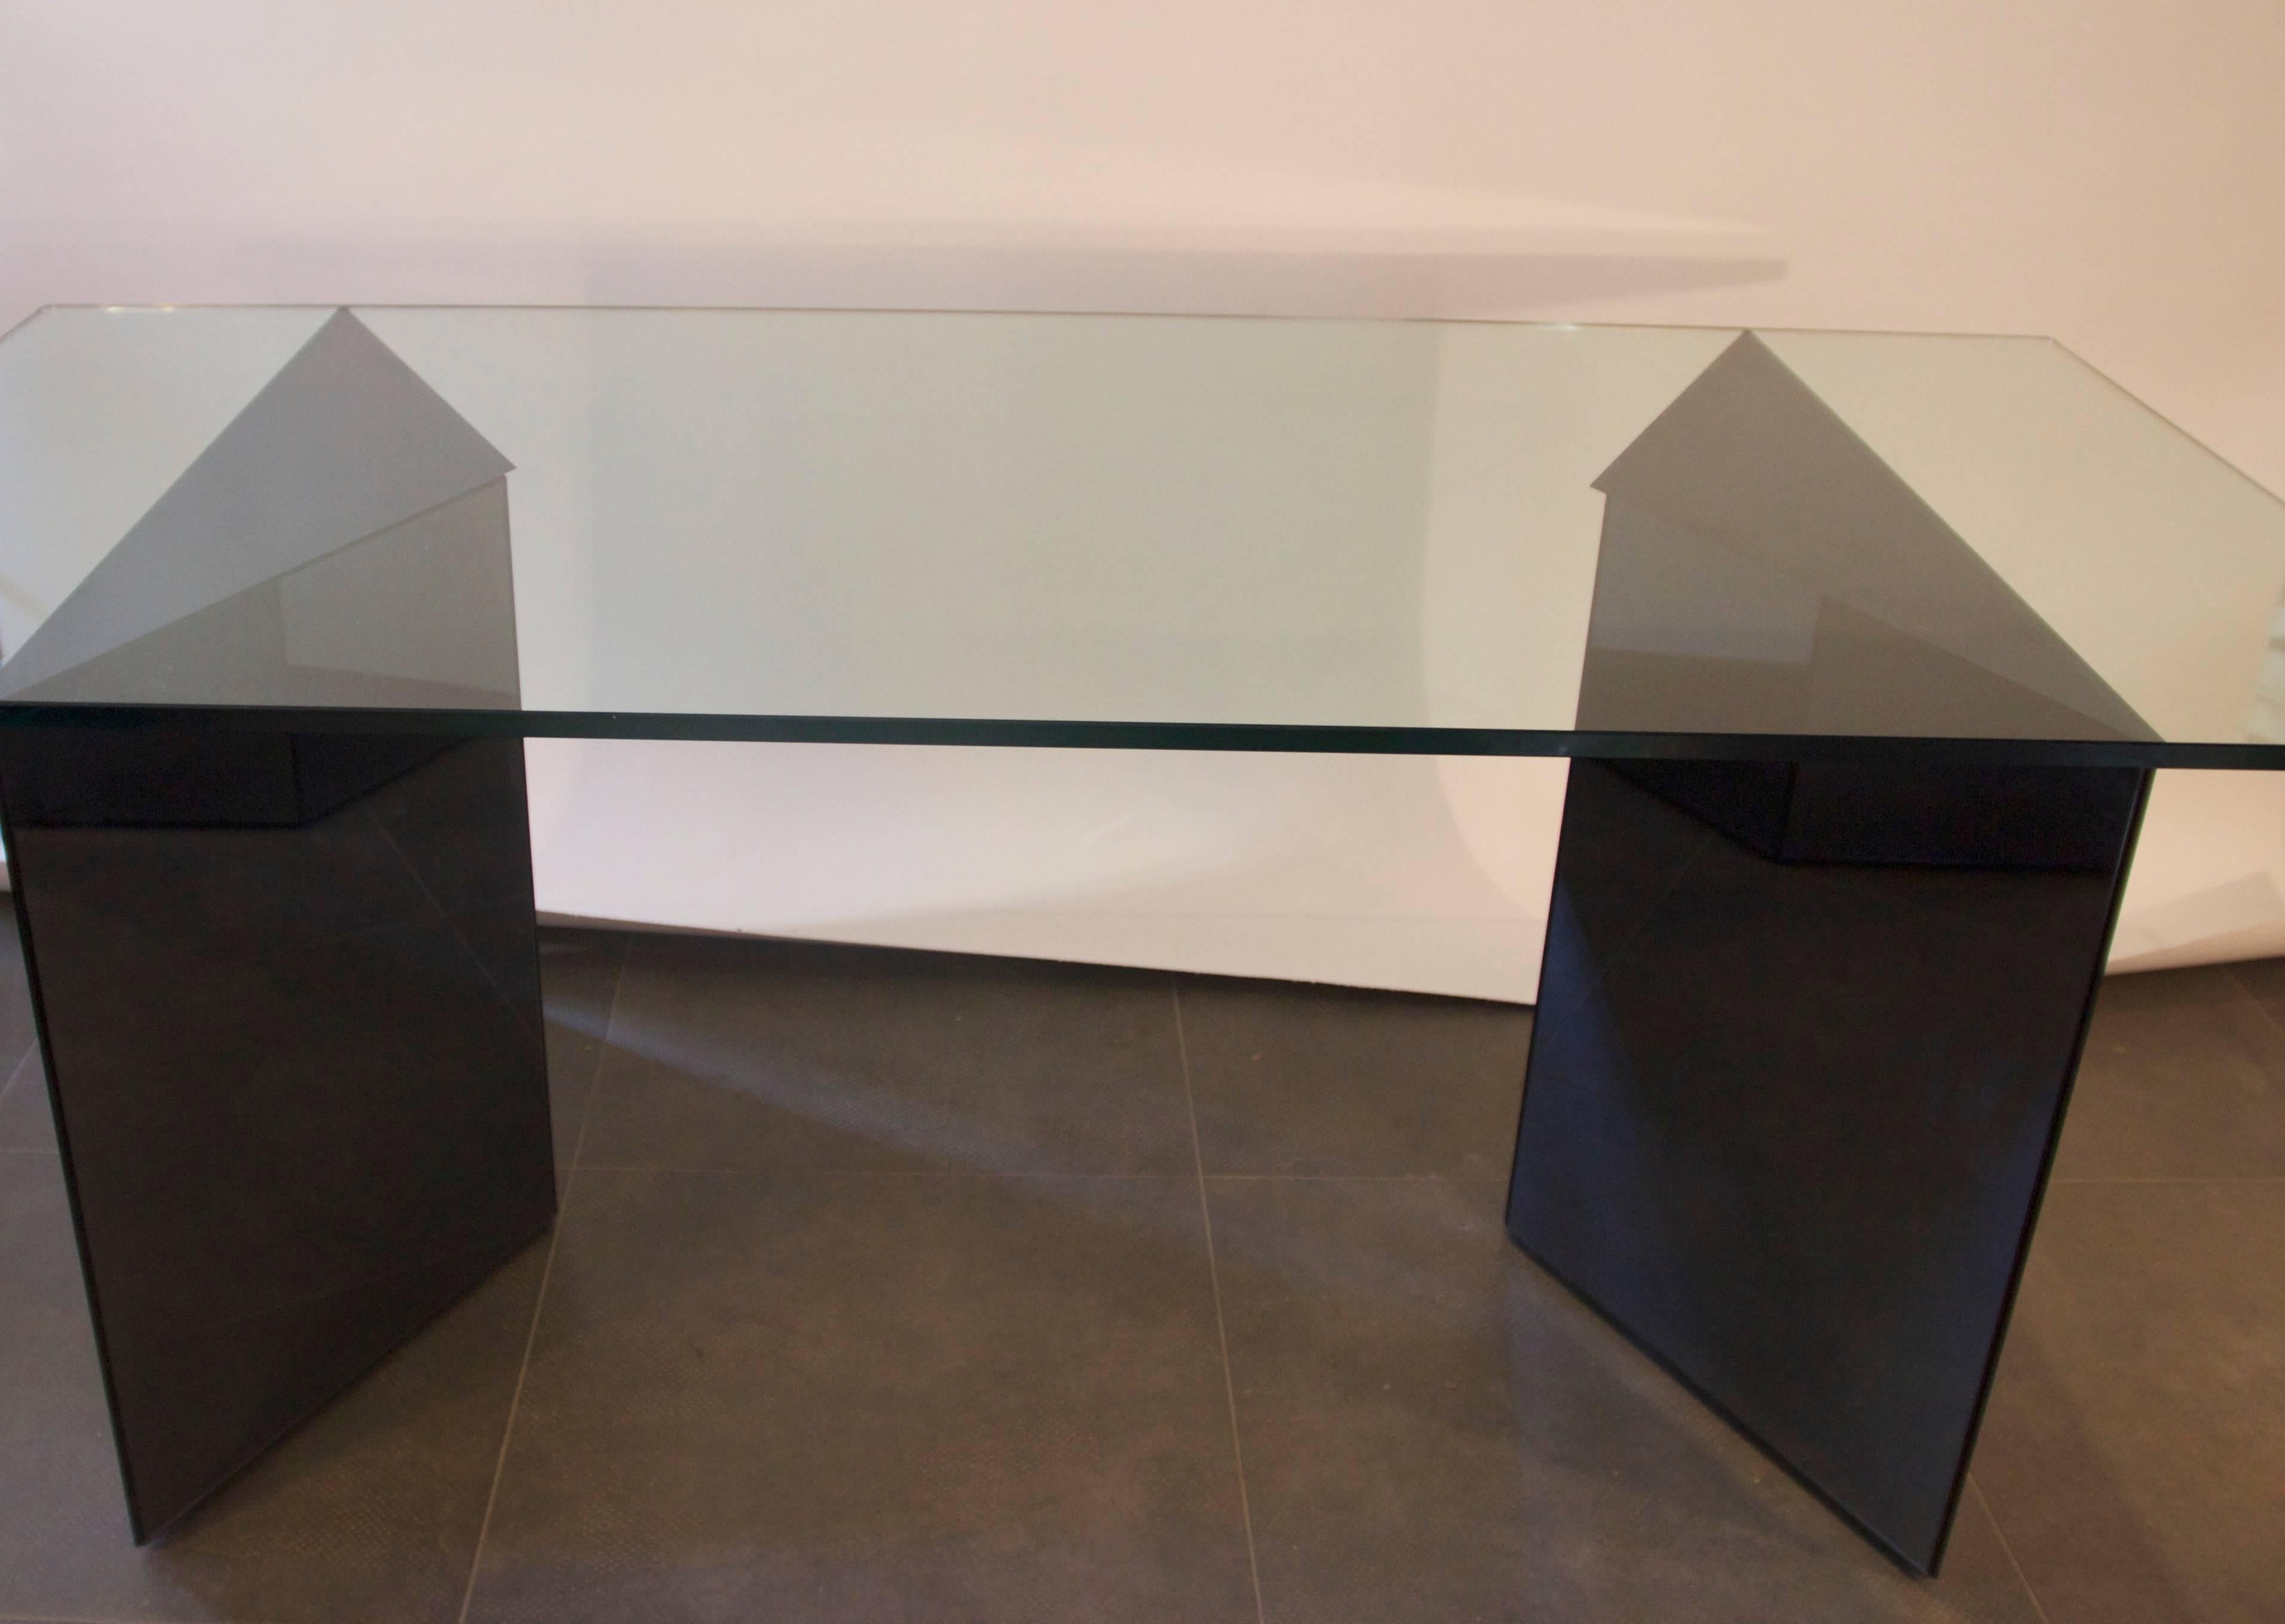 Giuseppe Raimondi
Large dining table, manufacture crystal Art,
Glass and wooden base covered with glass,
circa 1970, Italy.
Height: 73 cm, width: 198 cm, depth: 94 cm.